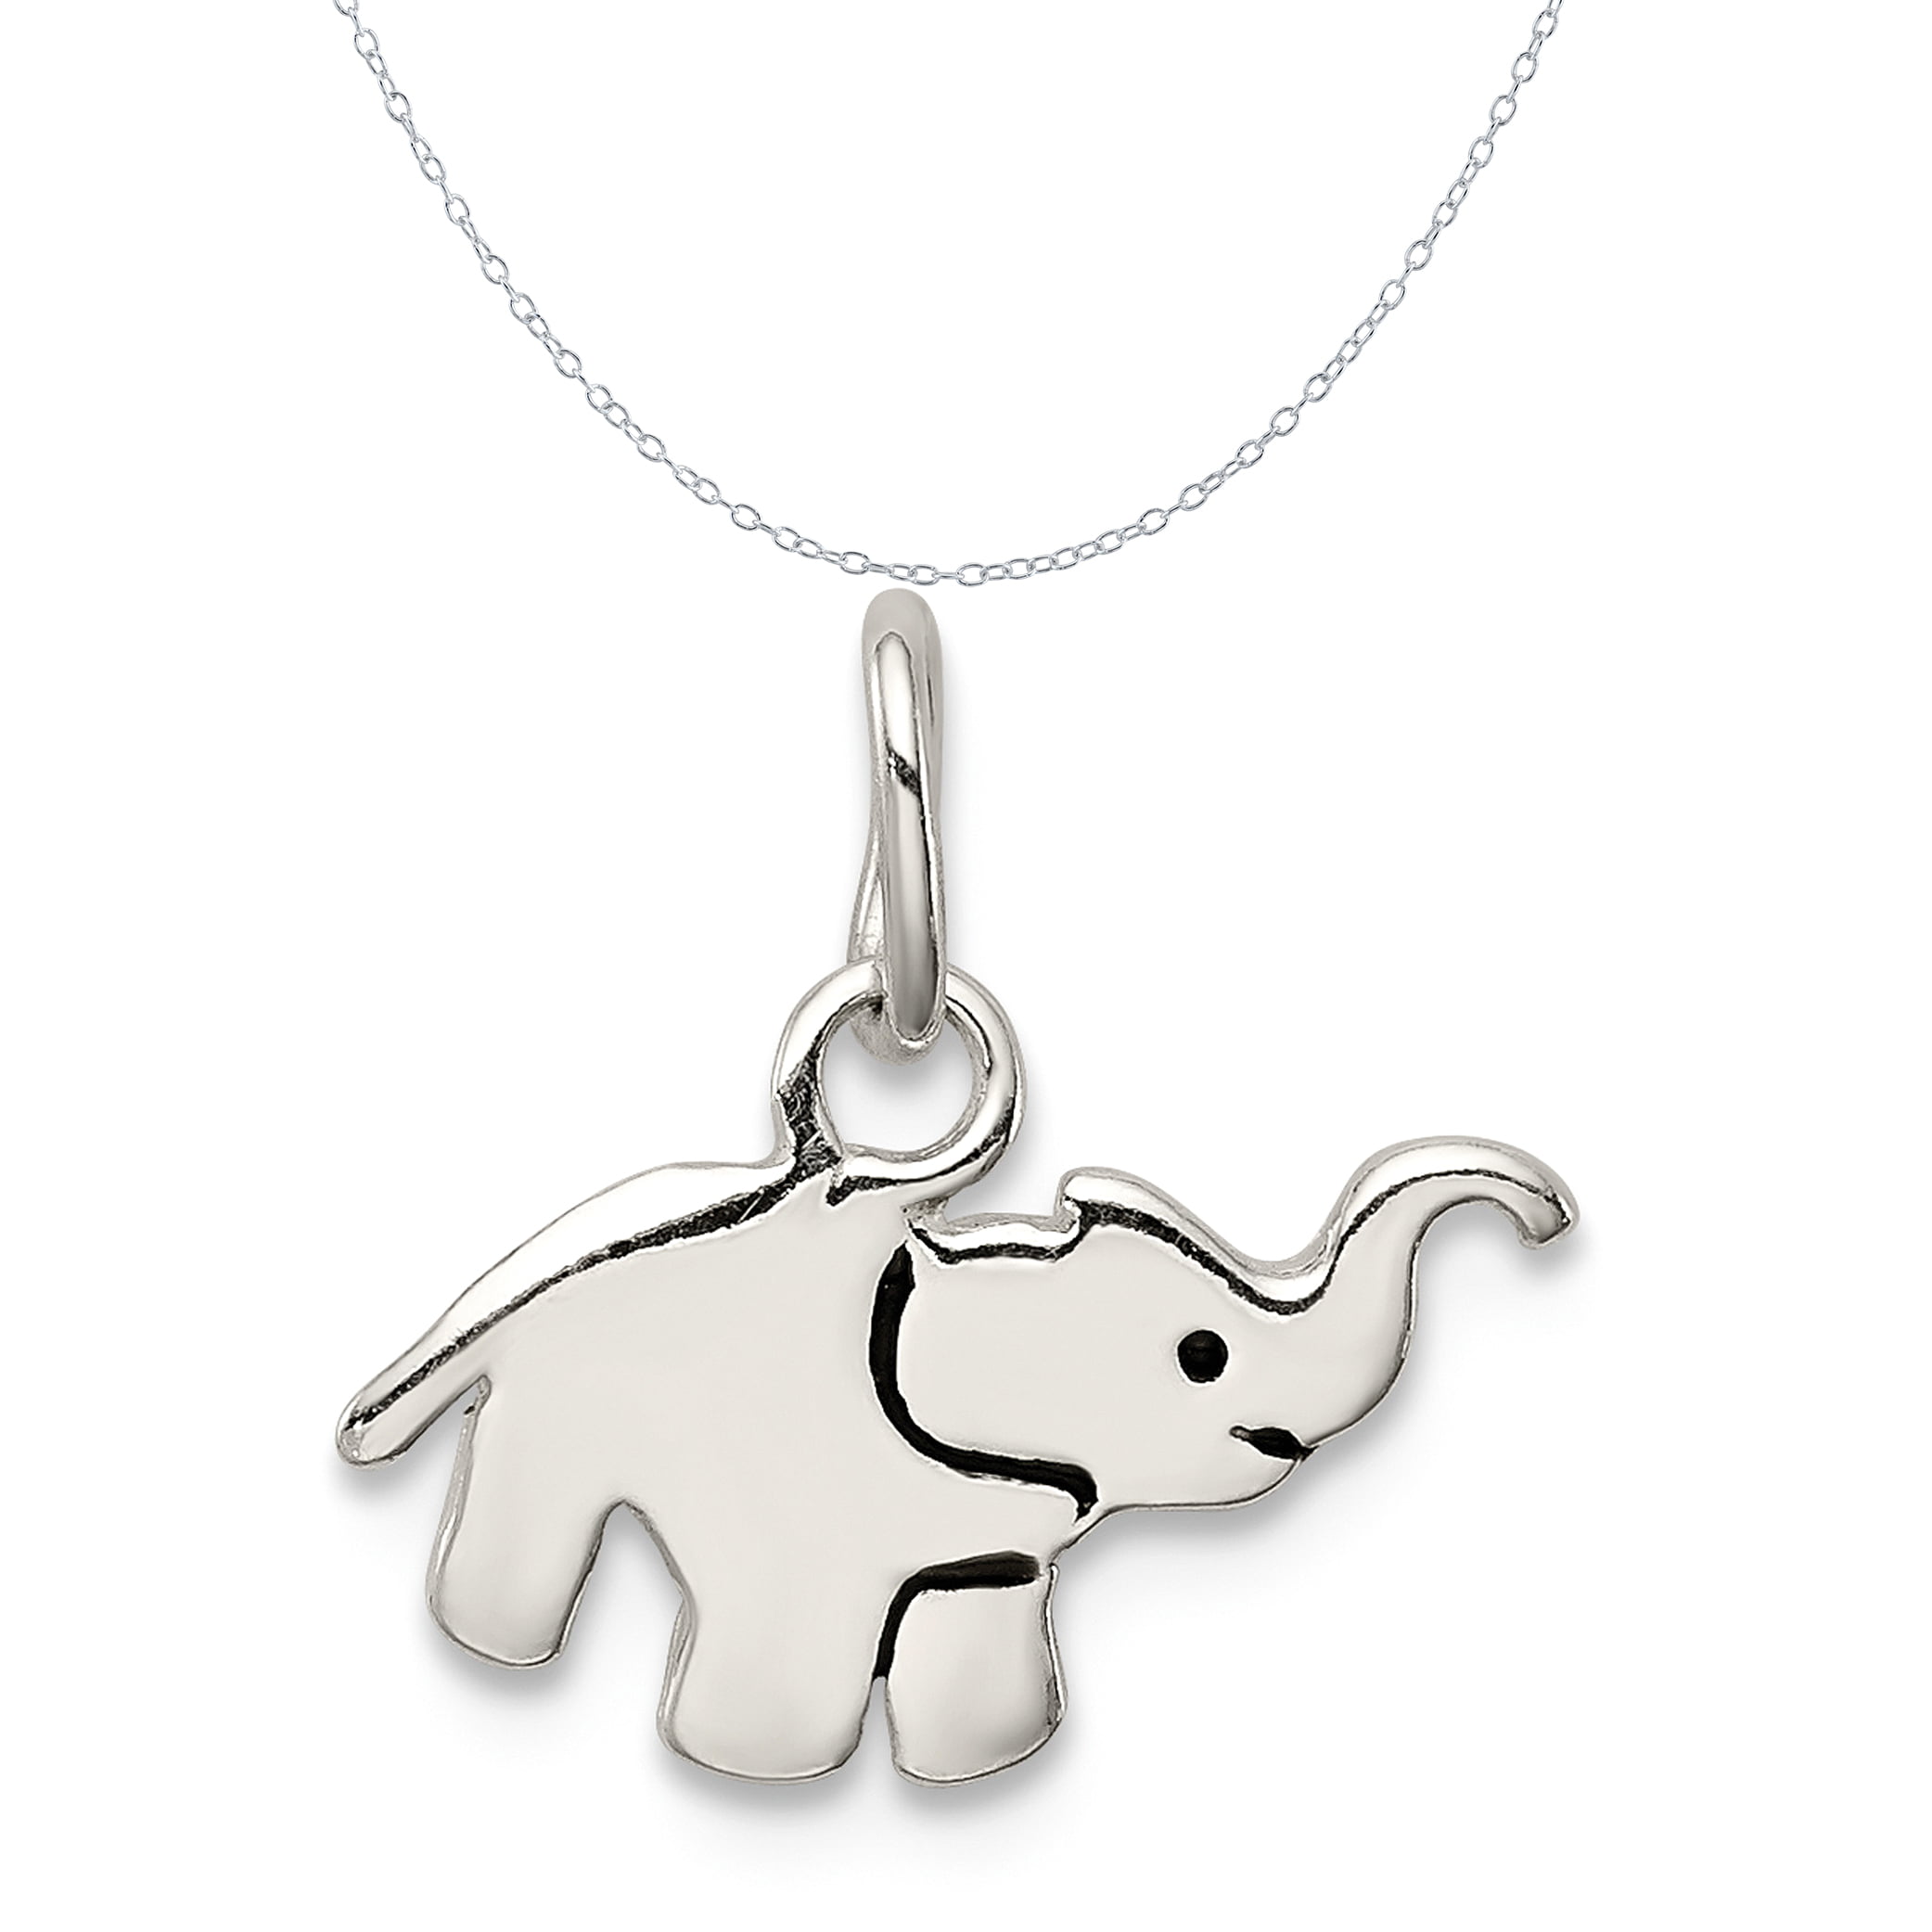 Elephant Animal Charm Pendant & Cable Link Chain Necklace in 925 Sterling Silver 